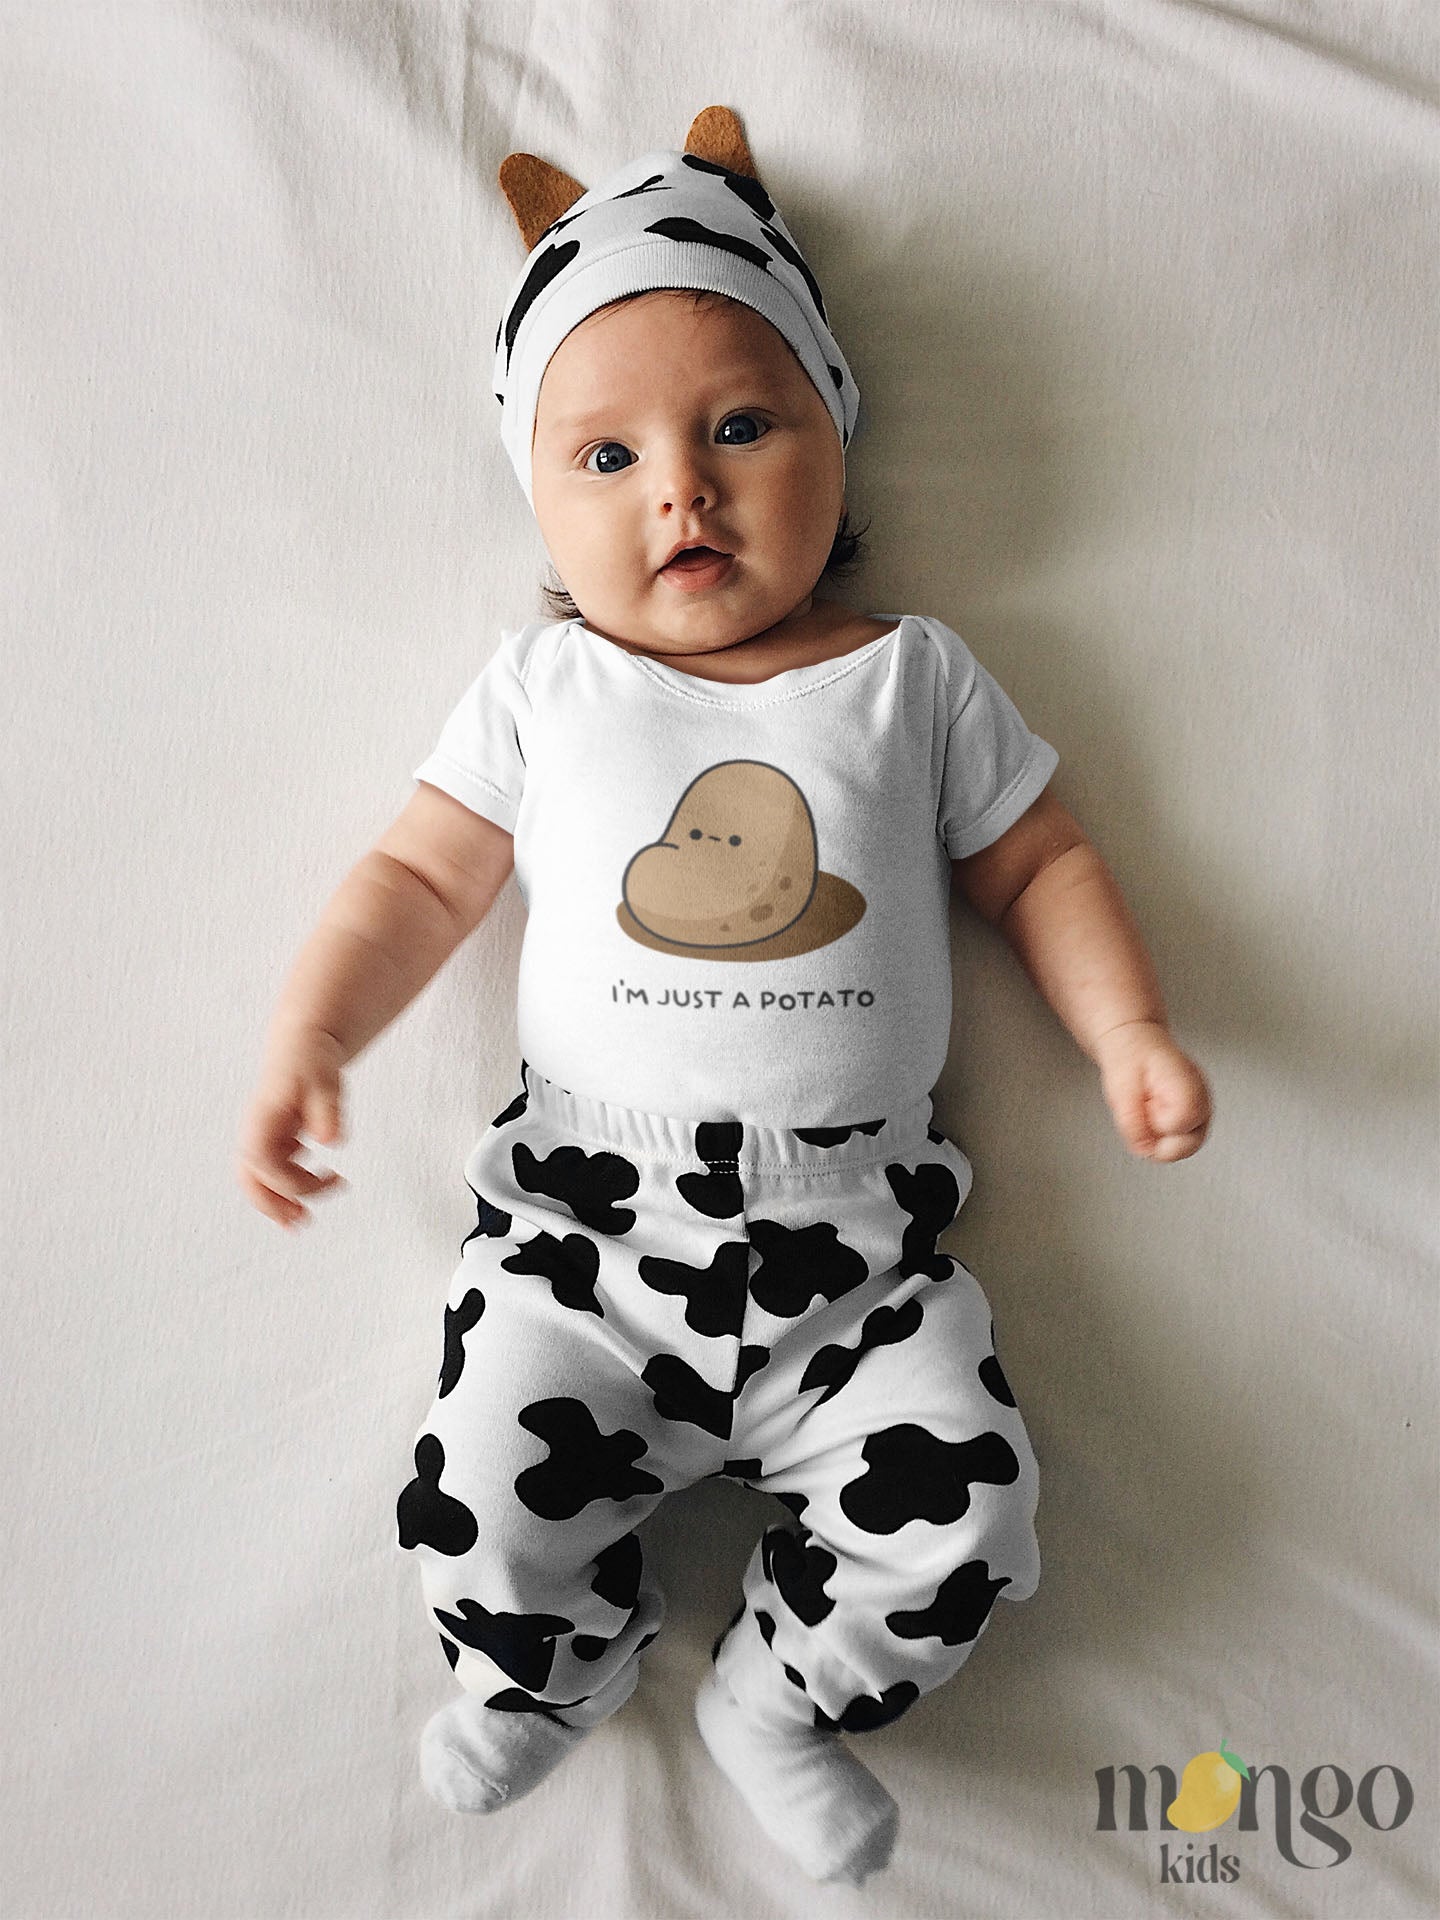 White Baby Bodysuit showcasing a playful printed graphic of a potato and the text 'I'm just a potato.' Explore this adorable tee that celebrates uniqueness and humor.